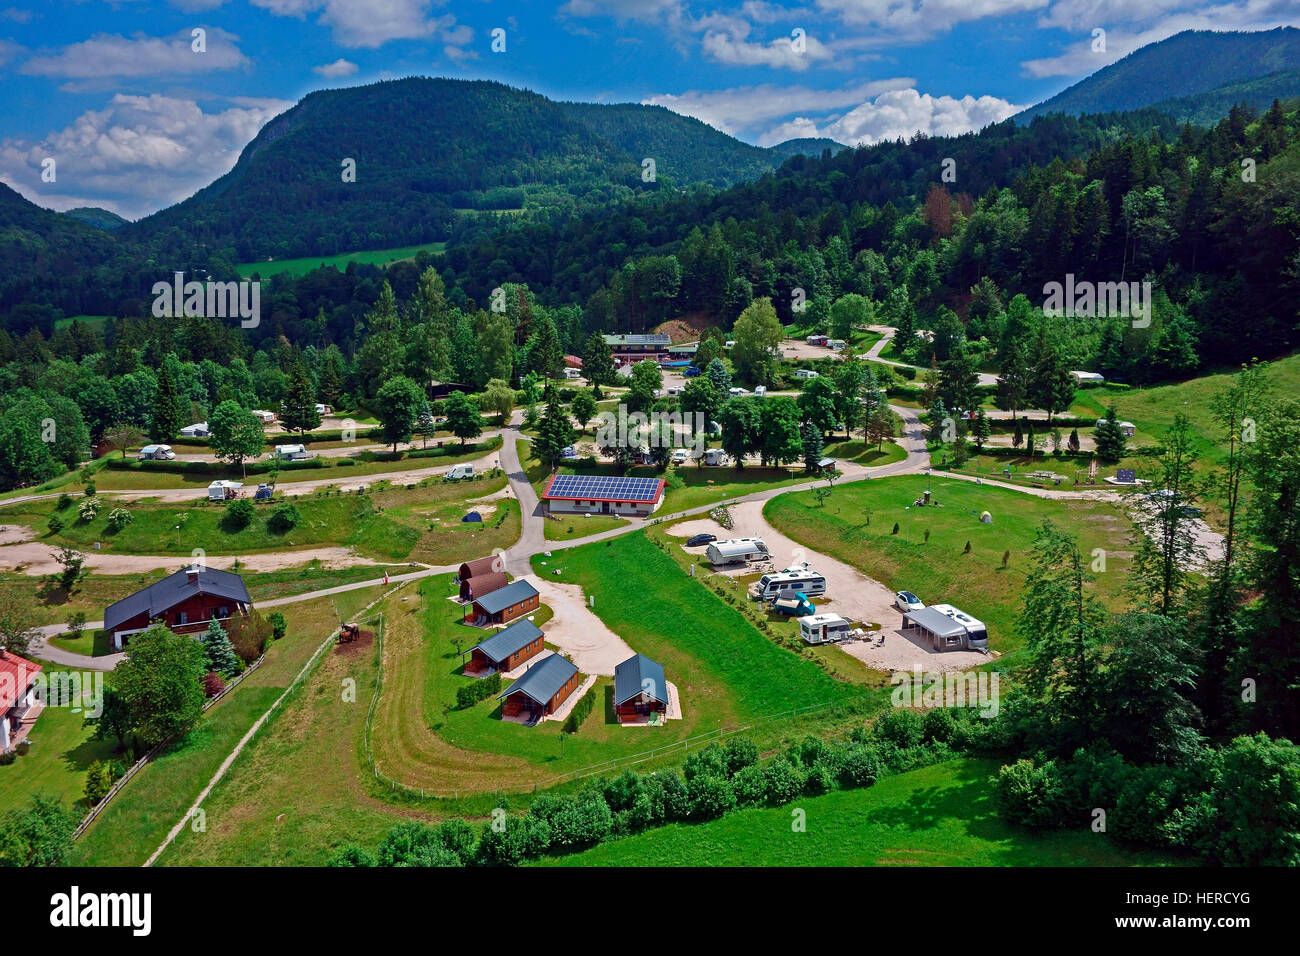 Camping resort allweglehen hi-res stock photography and images - Alamy